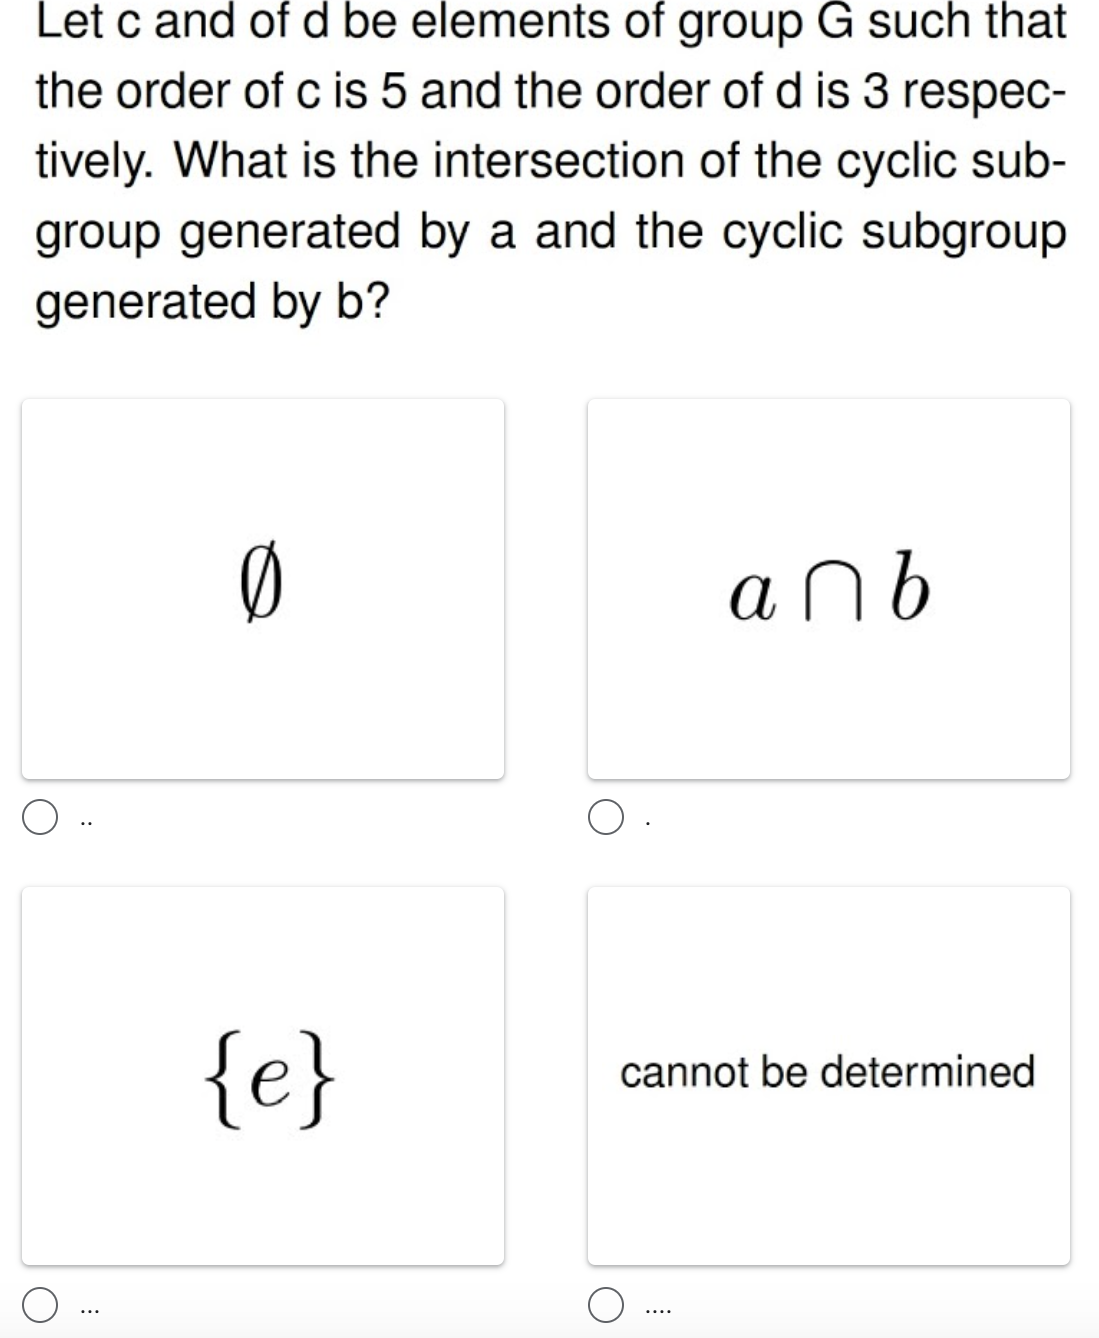 Let c and of d be elements of group G such that
the order of c is 5 and the order of d is 3 respec-
tively. What is the intersection of the cyclic sub-
group generated by a and the cyclic subgroup
generated by b?
anb
{e}
cannot be determined
